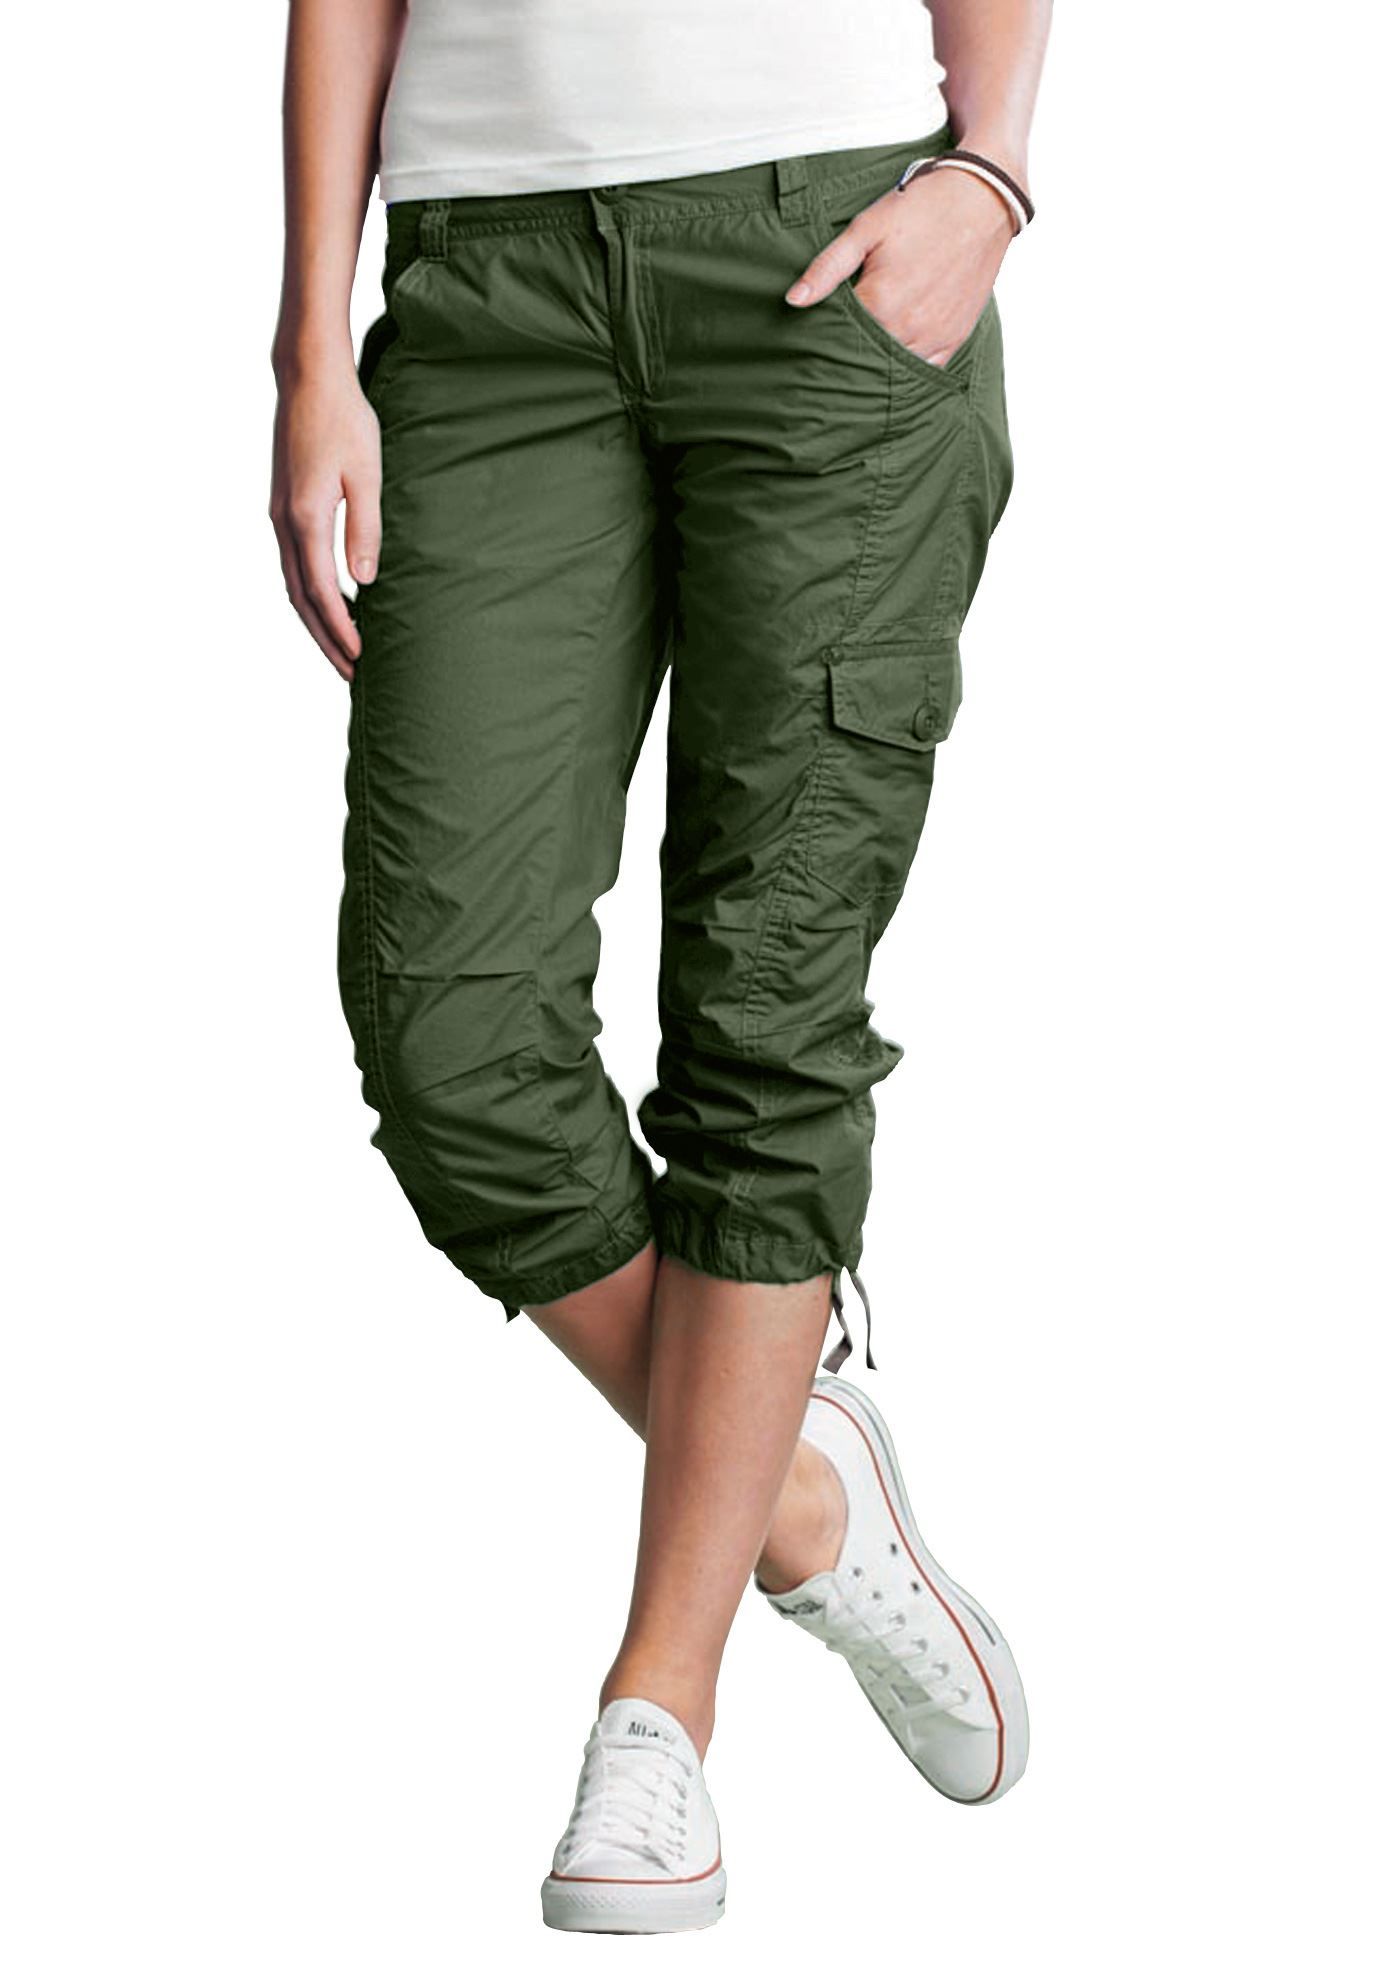 Womens Capris Supplier & Manufacturer in Los Angeles